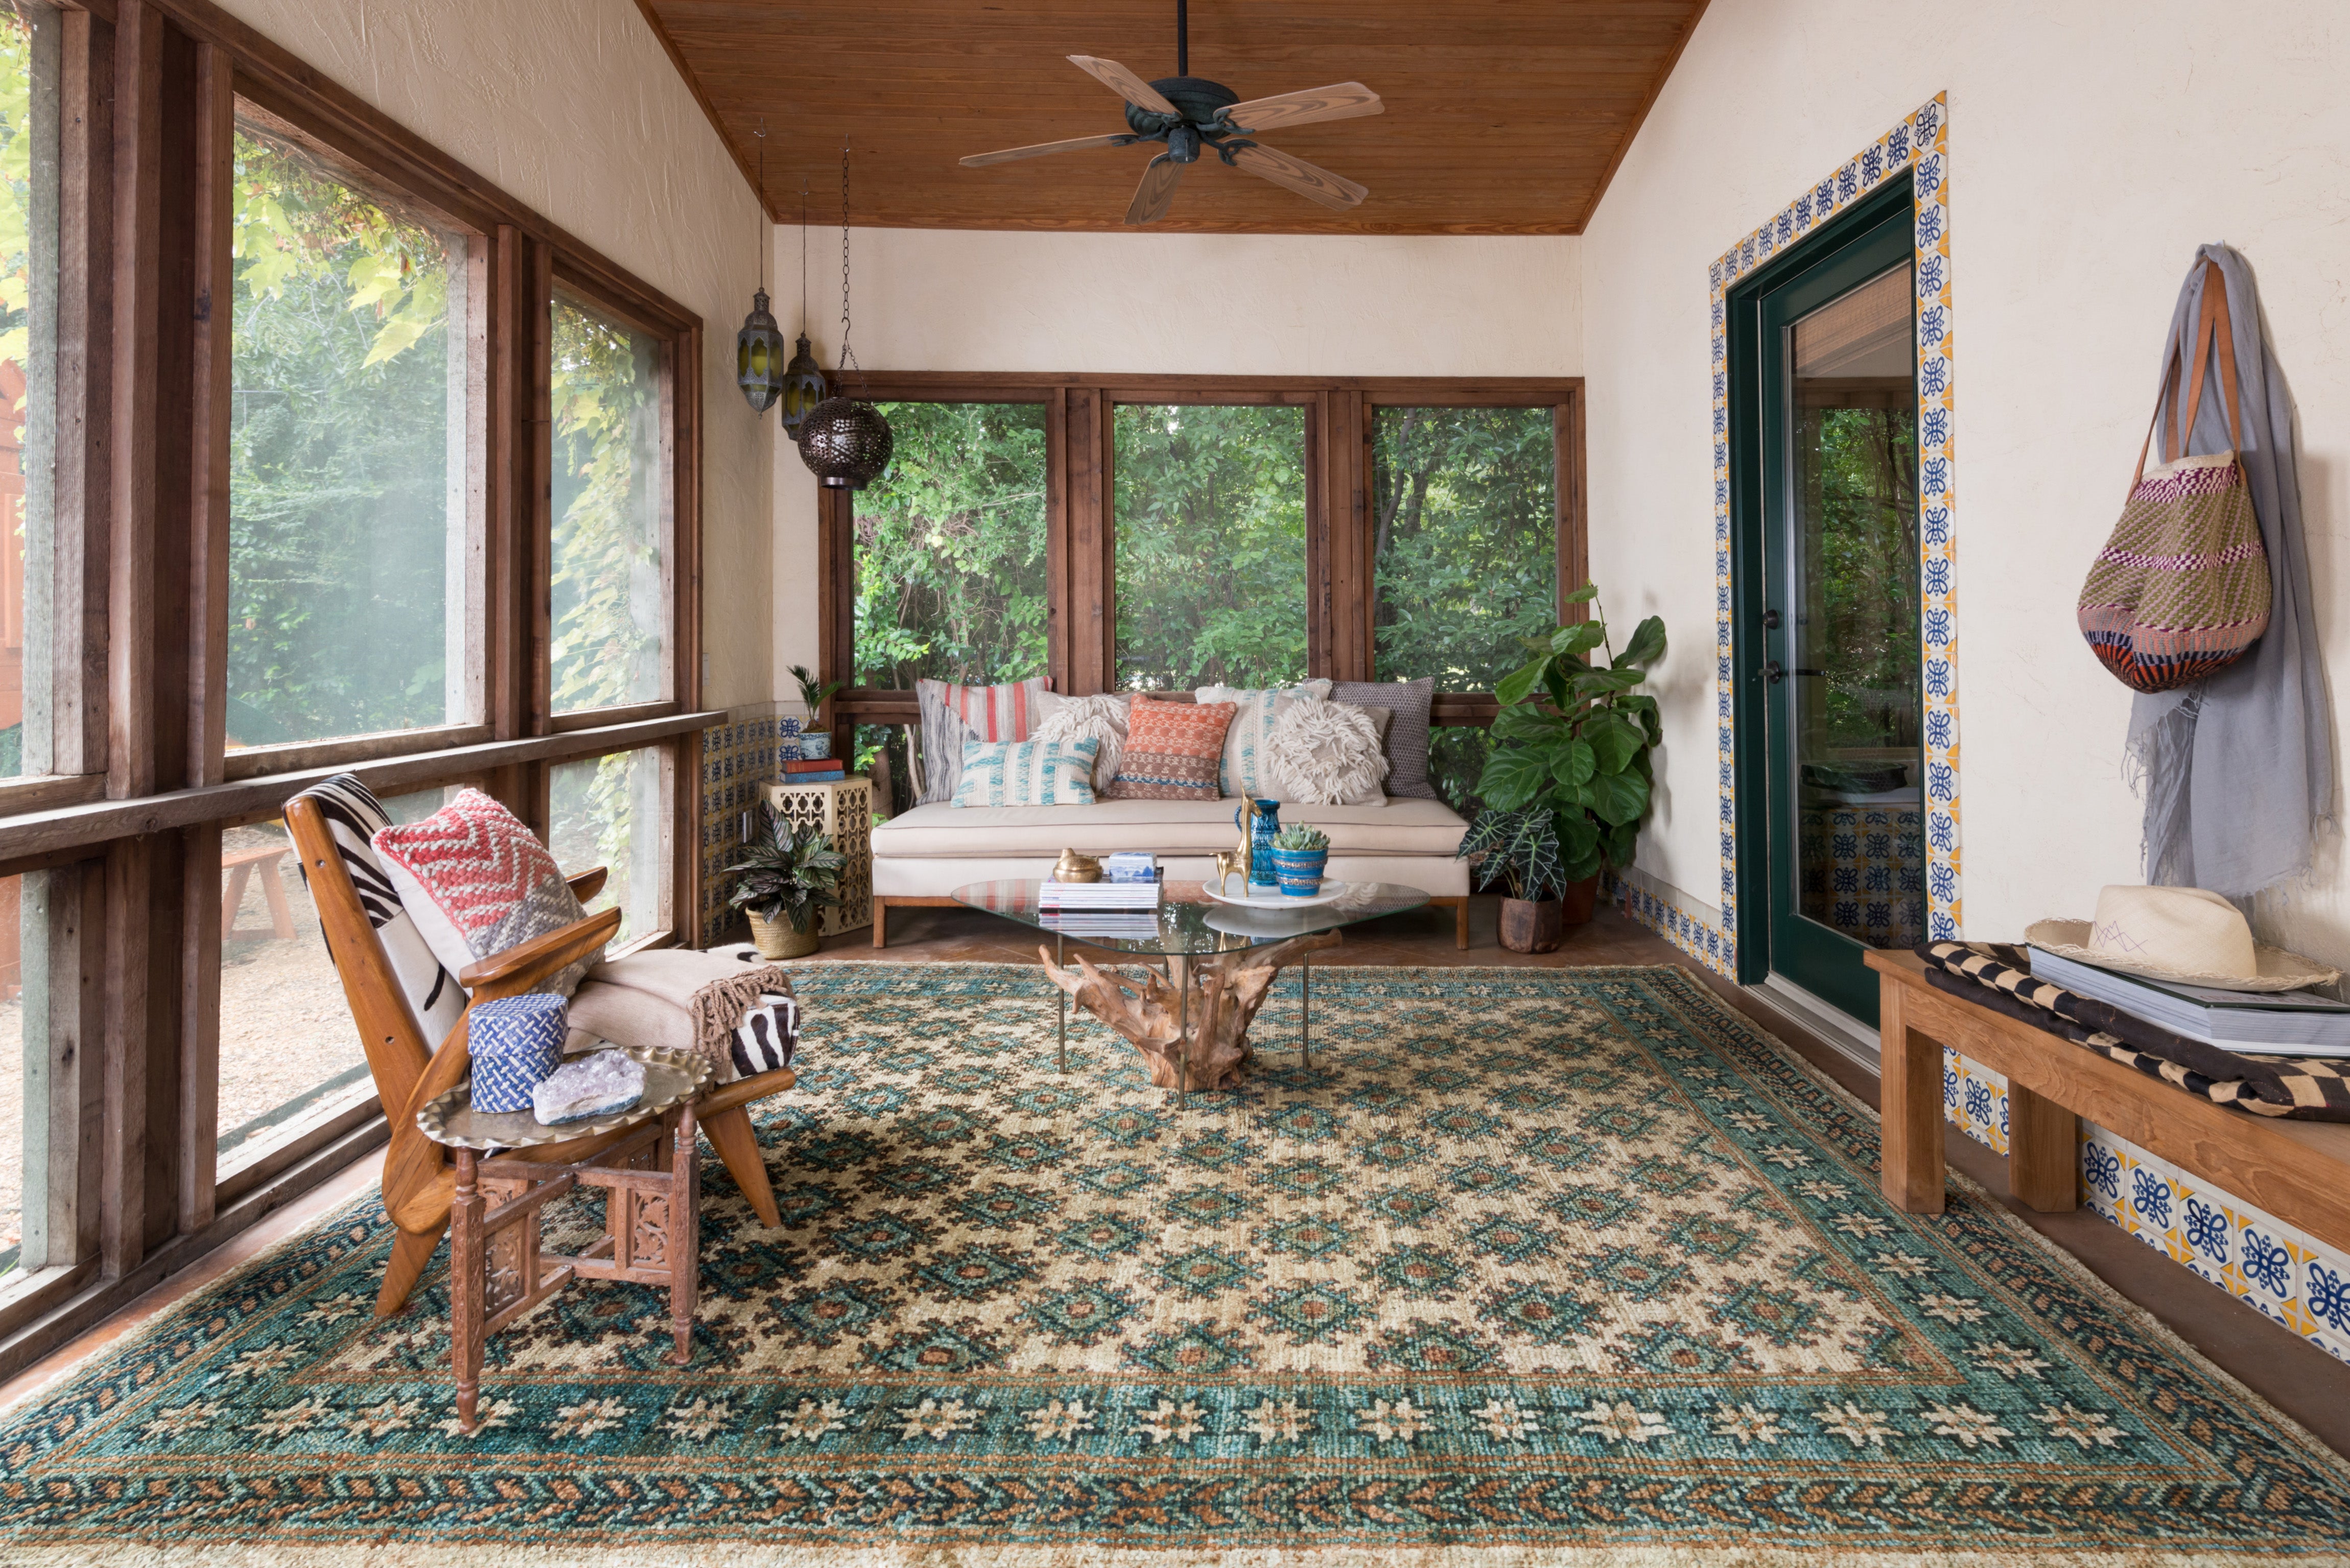 green and ivory area rug on the floor of a rustic looking living room. The ceiling is lined with cedar planks and the furniture is wooden. The coffee table is a reclaimed tree trunk. 